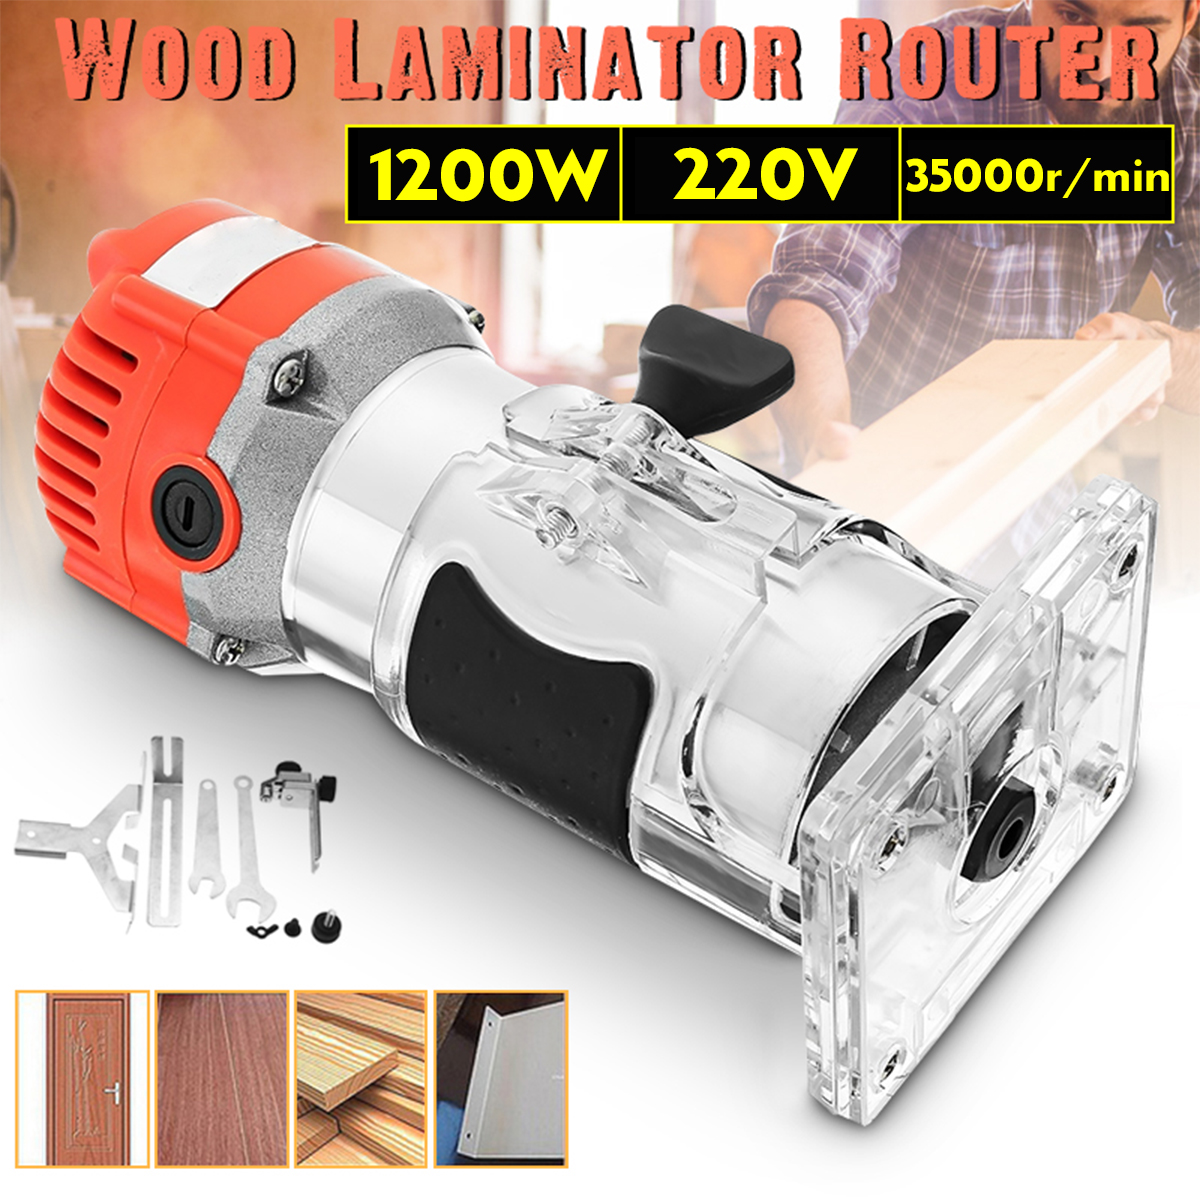 110V220V-1200W-635mm-Wood-Laminate-Palm-Router-Electric-Hand-Trimmer-Edge-Joiners-Woodworking-Tool-1539226-1